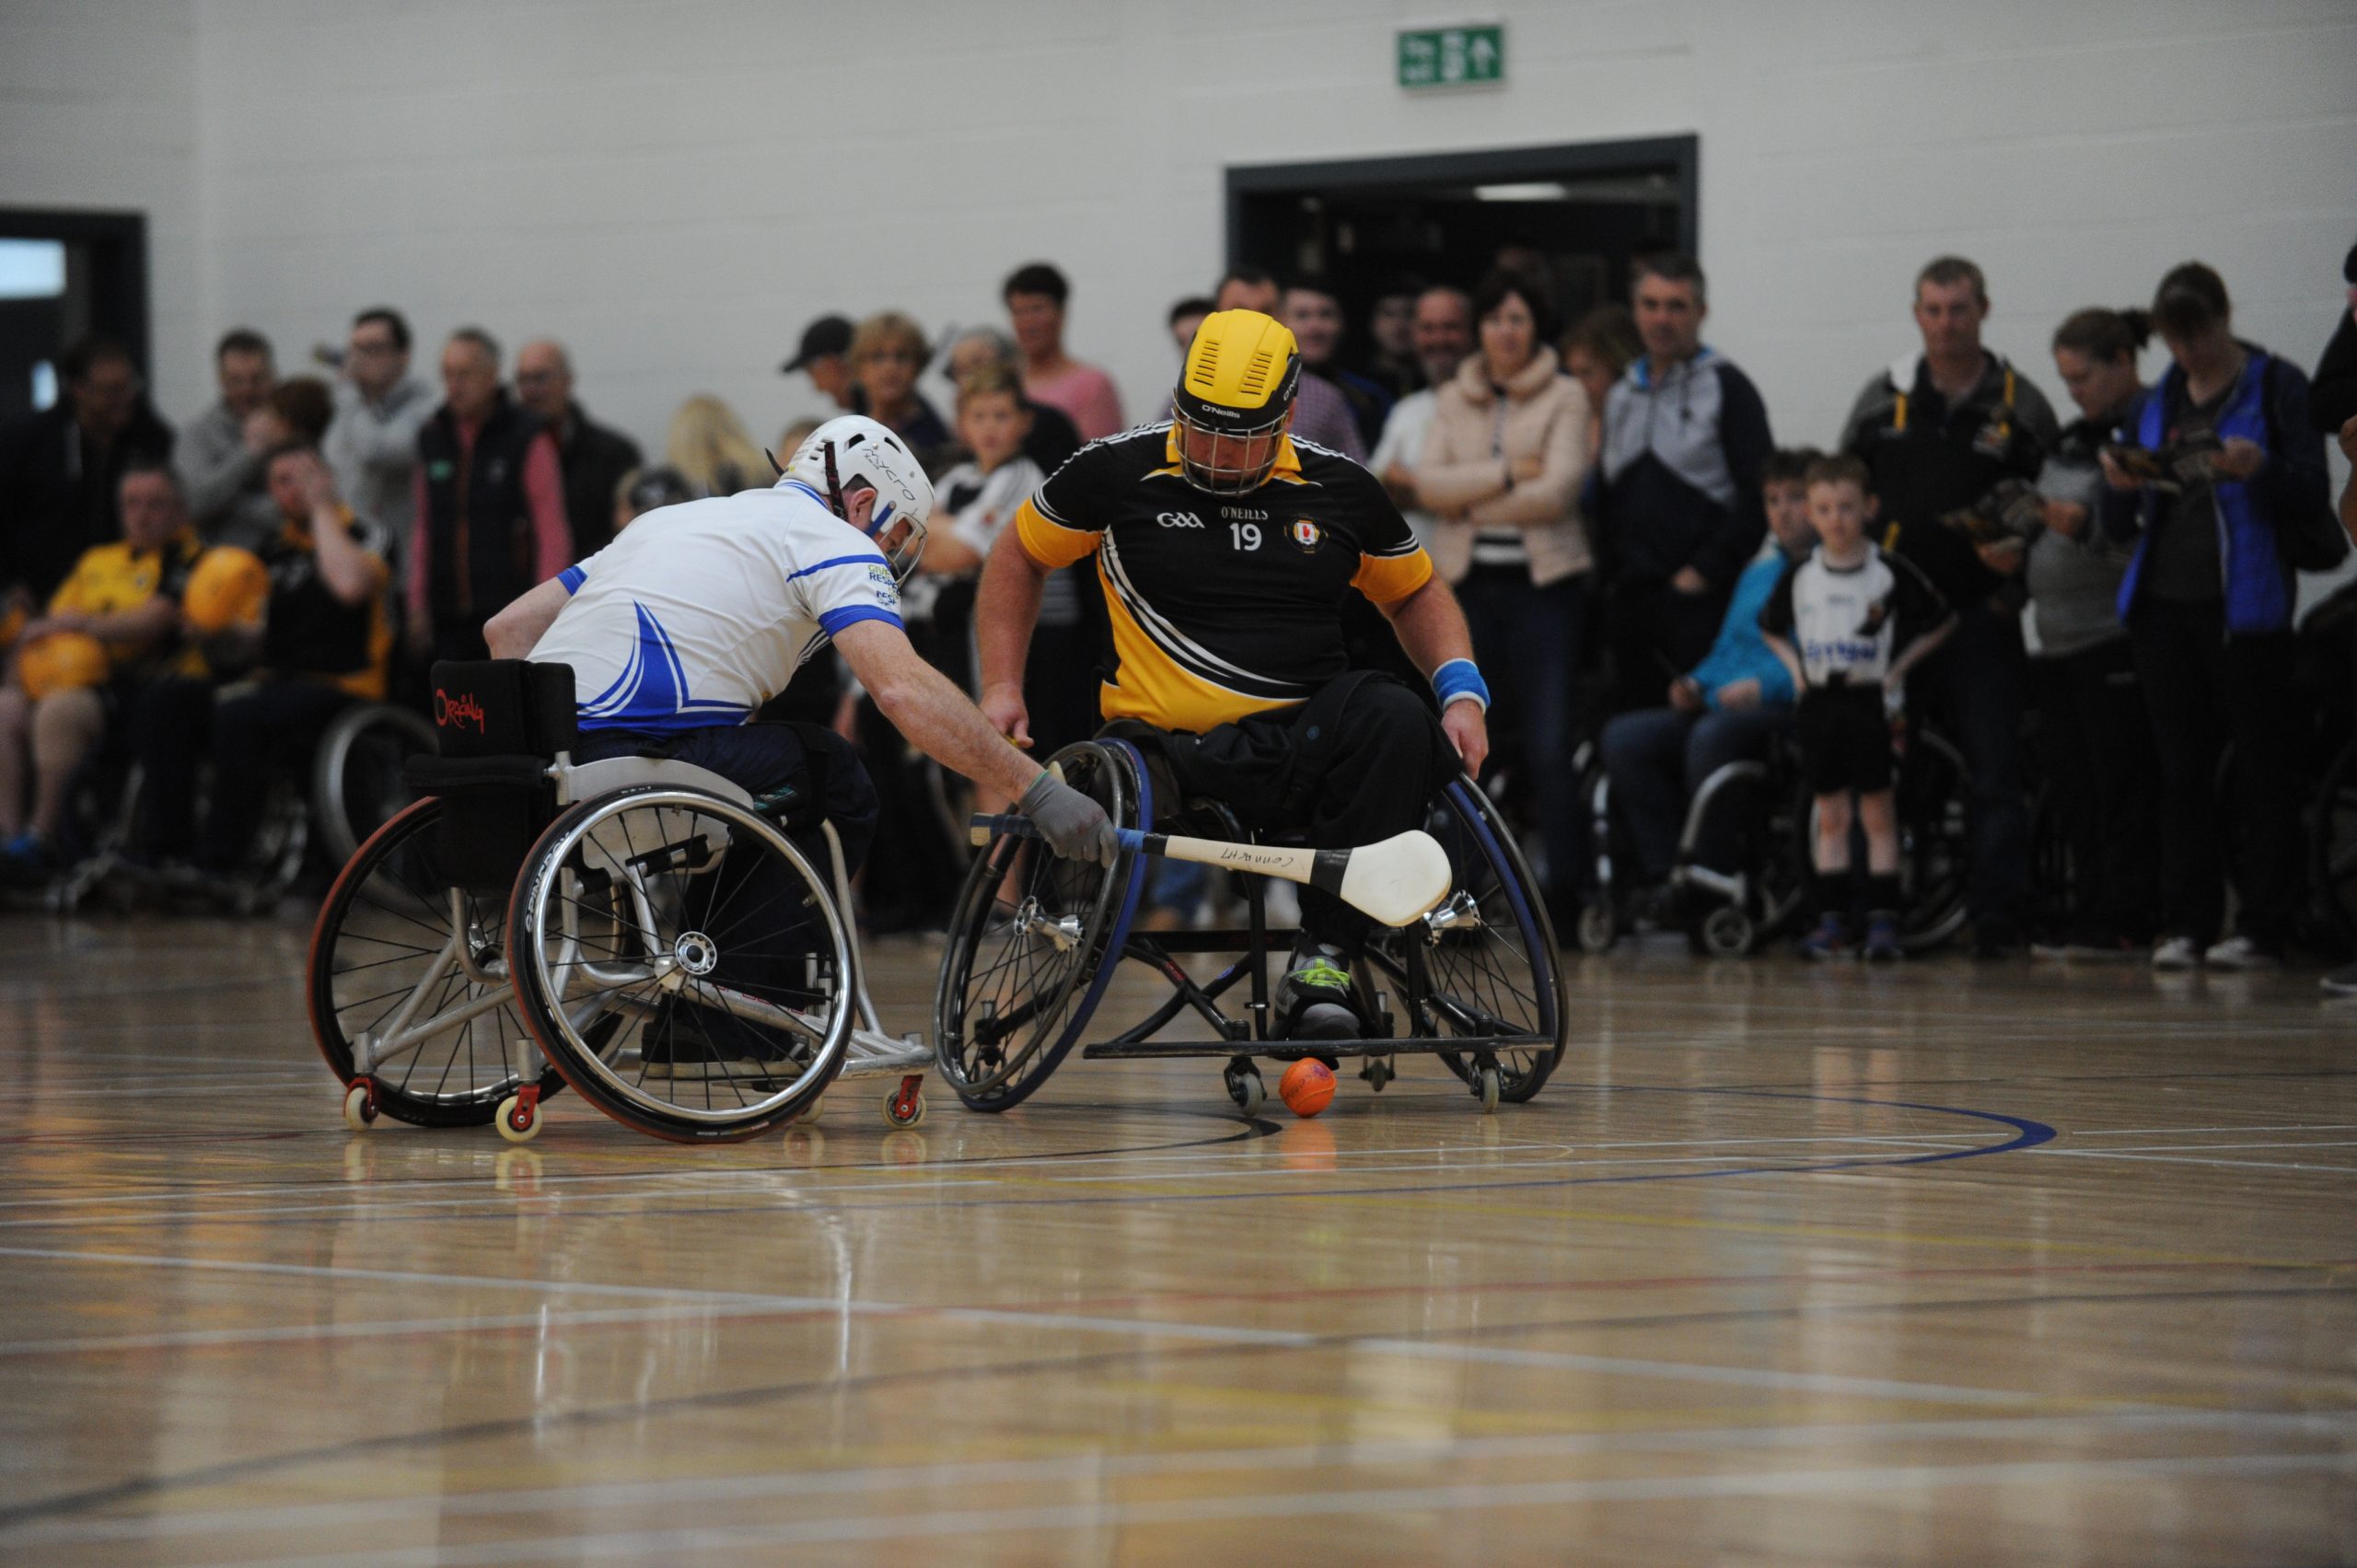 Ulster host final round of M Donnelly Wheelchair Hurling league